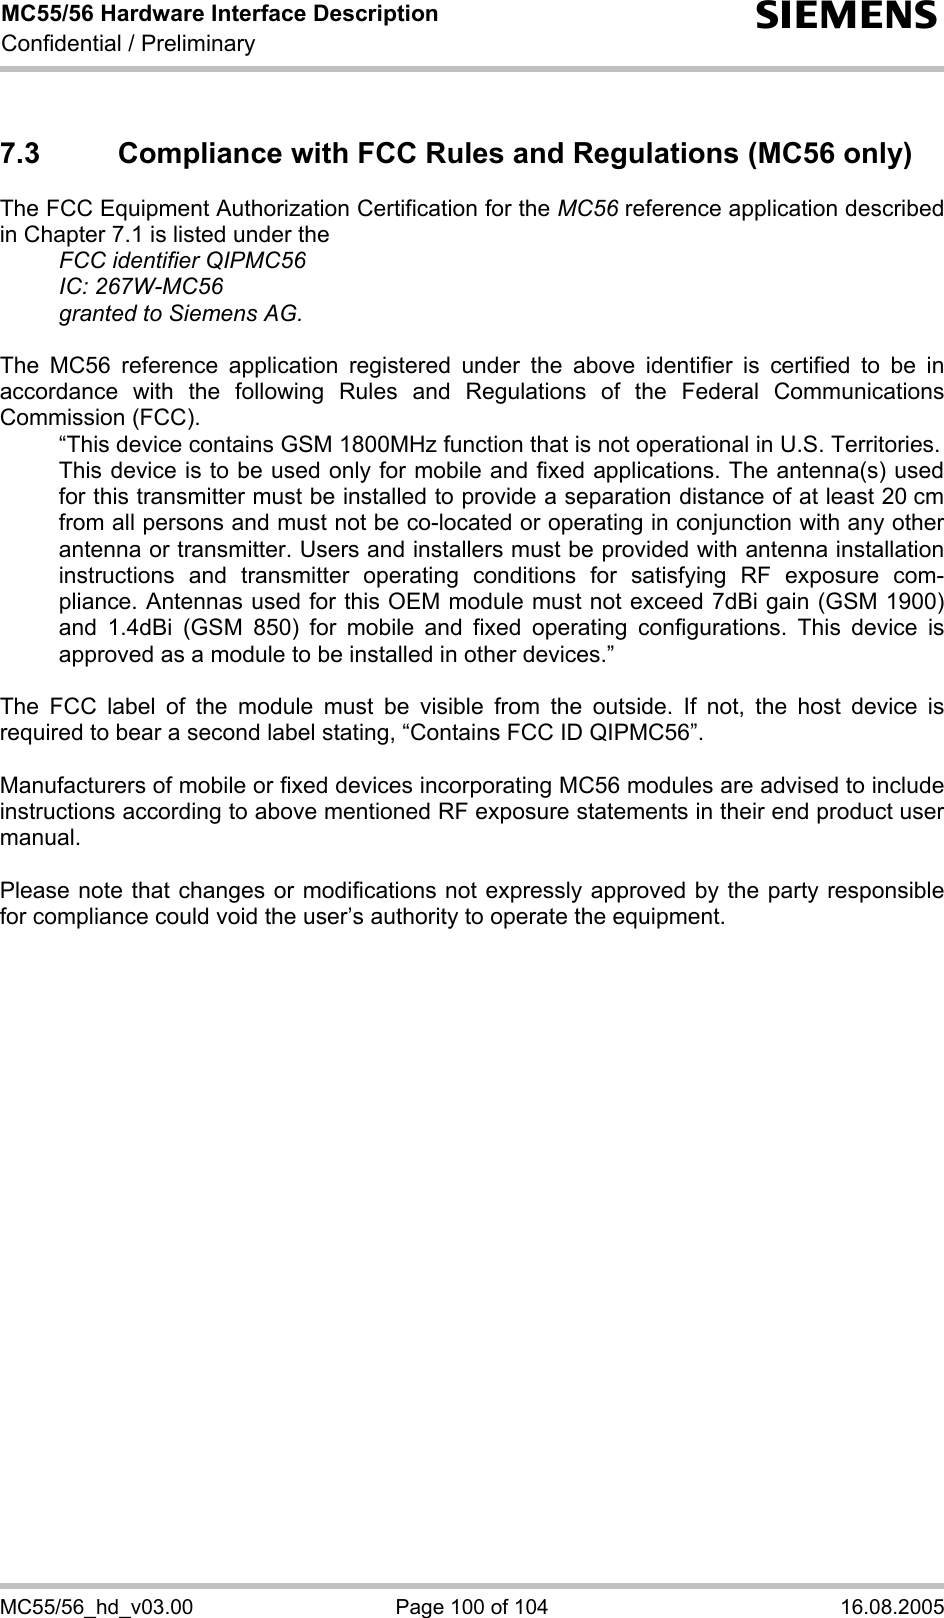 MC55/56 Hardware Interface Description Confidential / Preliminary s MC55/56_hd_v03.00  Page 100 of 104  16.08.2005 7.3  Compliance with FCC Rules and Regulations (MC56 only) The FCC Equipment Authorization Certification for the MC56 reference application described in Chapter 7.1 is listed under the   FCC identifier QIPMC56  IC: 267W-MC56   granted to Siemens AG.   The MC56 reference application registered under the above identifier is certified to be in accordance with the following Rules and Regulations of the Federal Communications Commission (FCC).    “This device contains GSM 1800MHz function that is not operational in U.S. Territories.    This device is to be used only for mobile and fixed applications. The antenna(s) used for this transmitter must be installed to provide a separation distance of at least 20 cm from all persons and must not be co-located or operating in conjunction with any other antenna or transmitter. Users and installers must be provided with antenna installation instructions and transmitter operating conditions for satisfying RF exposure com-pliance. Antennas used for this OEM module must not exceed 7dBi gain (GSM 1900) and 1.4dBi (GSM 850) for mobile and fixed operating configurations. This device is approved as a module to be installed in other devices.”  The FCC label of the module must be visible from the outside. If not, the host device is required to bear a second label stating, “Contains FCC ID QIPMC56”.  Manufacturers of mobile or fixed devices incorporating MC56 modules are advised to include instructions according to above mentioned RF exposure statements in their end product user manual.   Please note that changes or modifications not expressly approved by the party responsible for compliance could void the user’s authority to operate the equipment.    